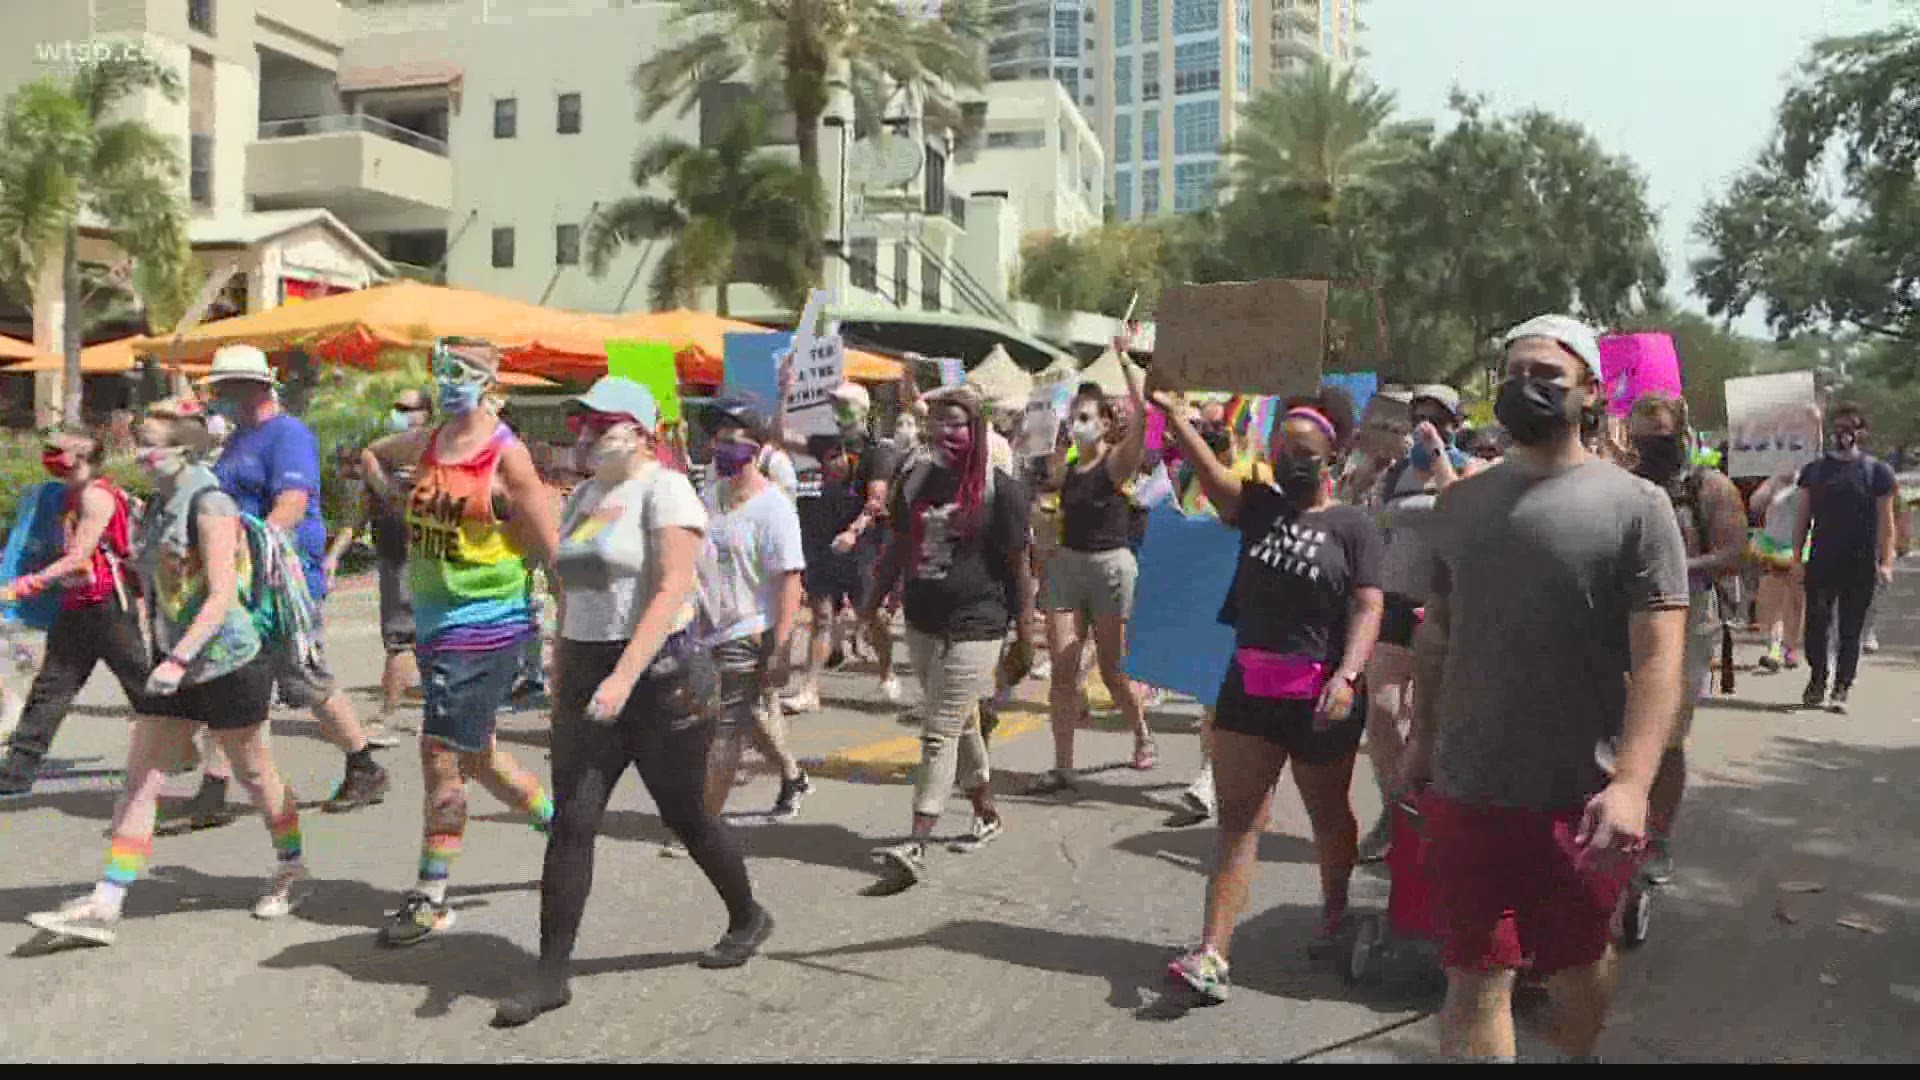 Organizer Eleni Sullivan says while Pride might feel a little different this year, it’s actually going back to its roots.